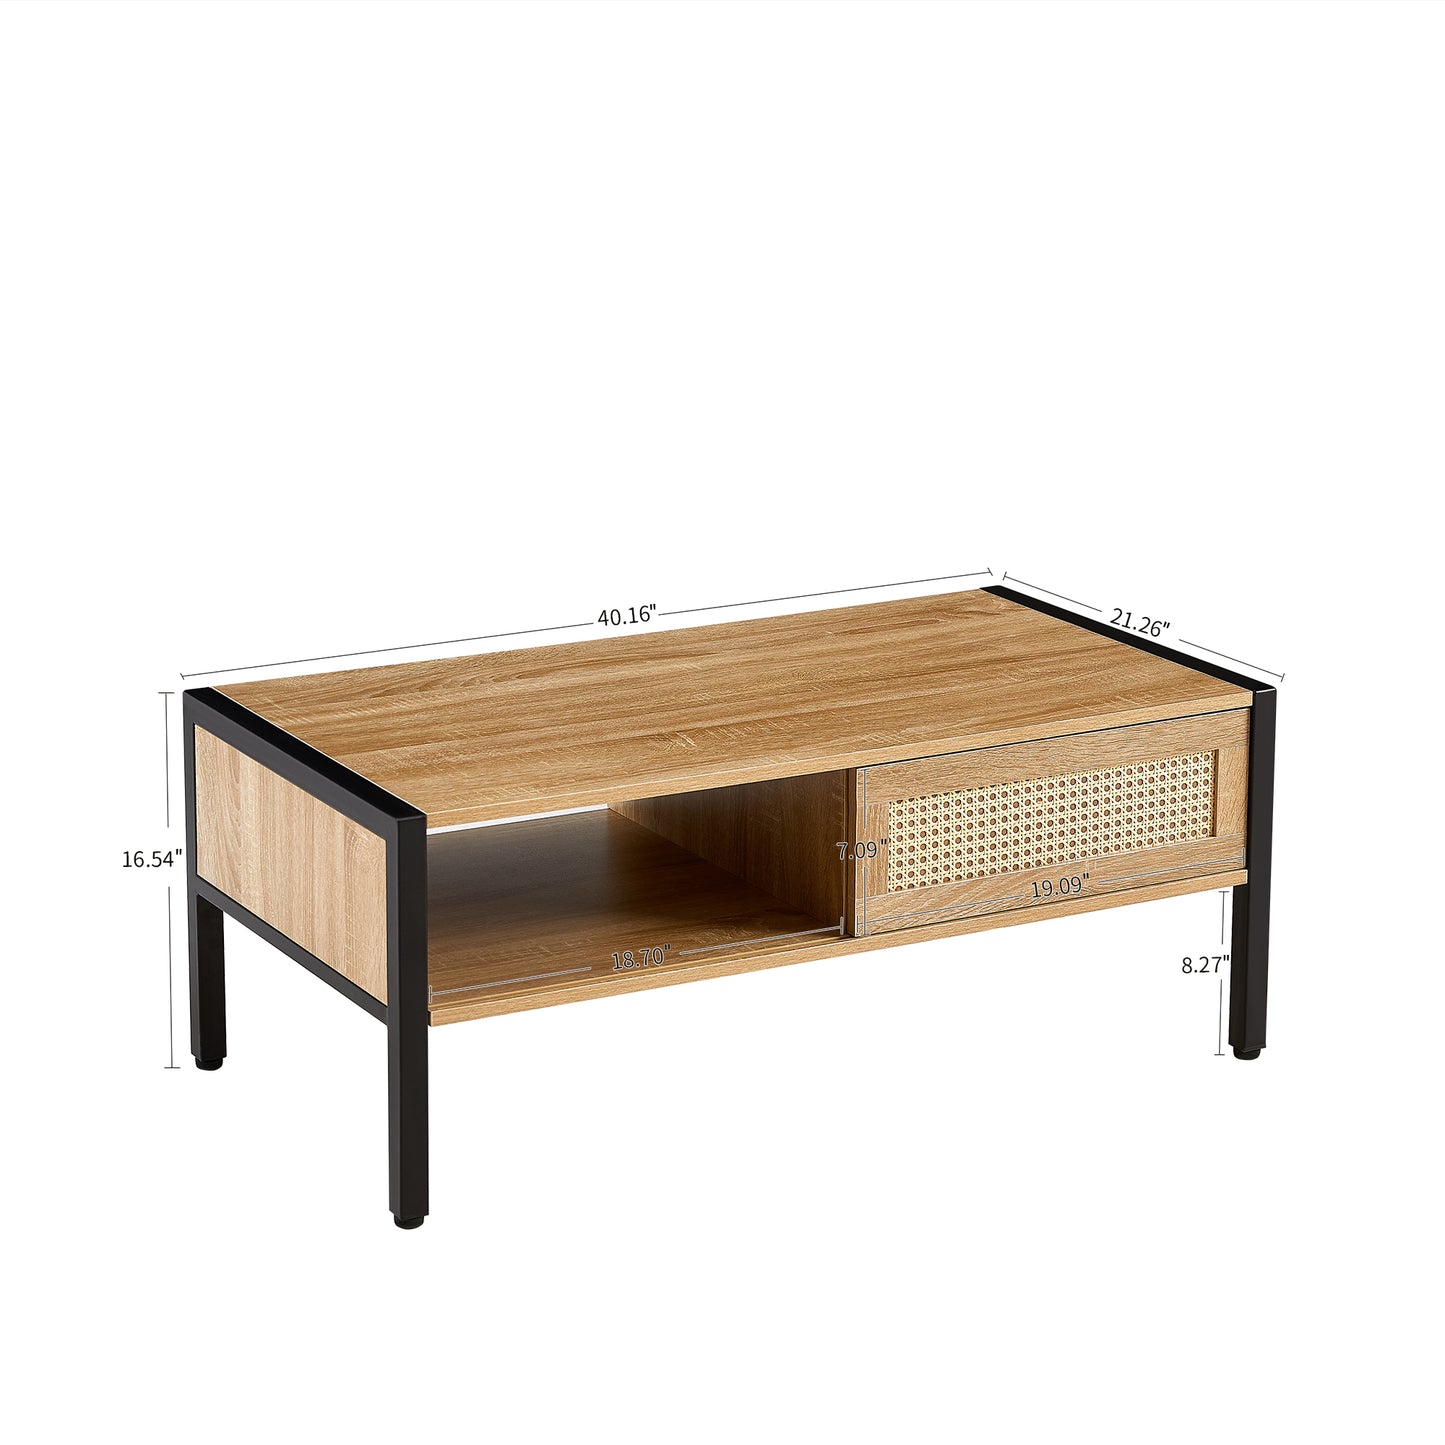 Smart FENDEE Rattan Coffee Table with Sliding Door Storage and Metal Leg for Living Room